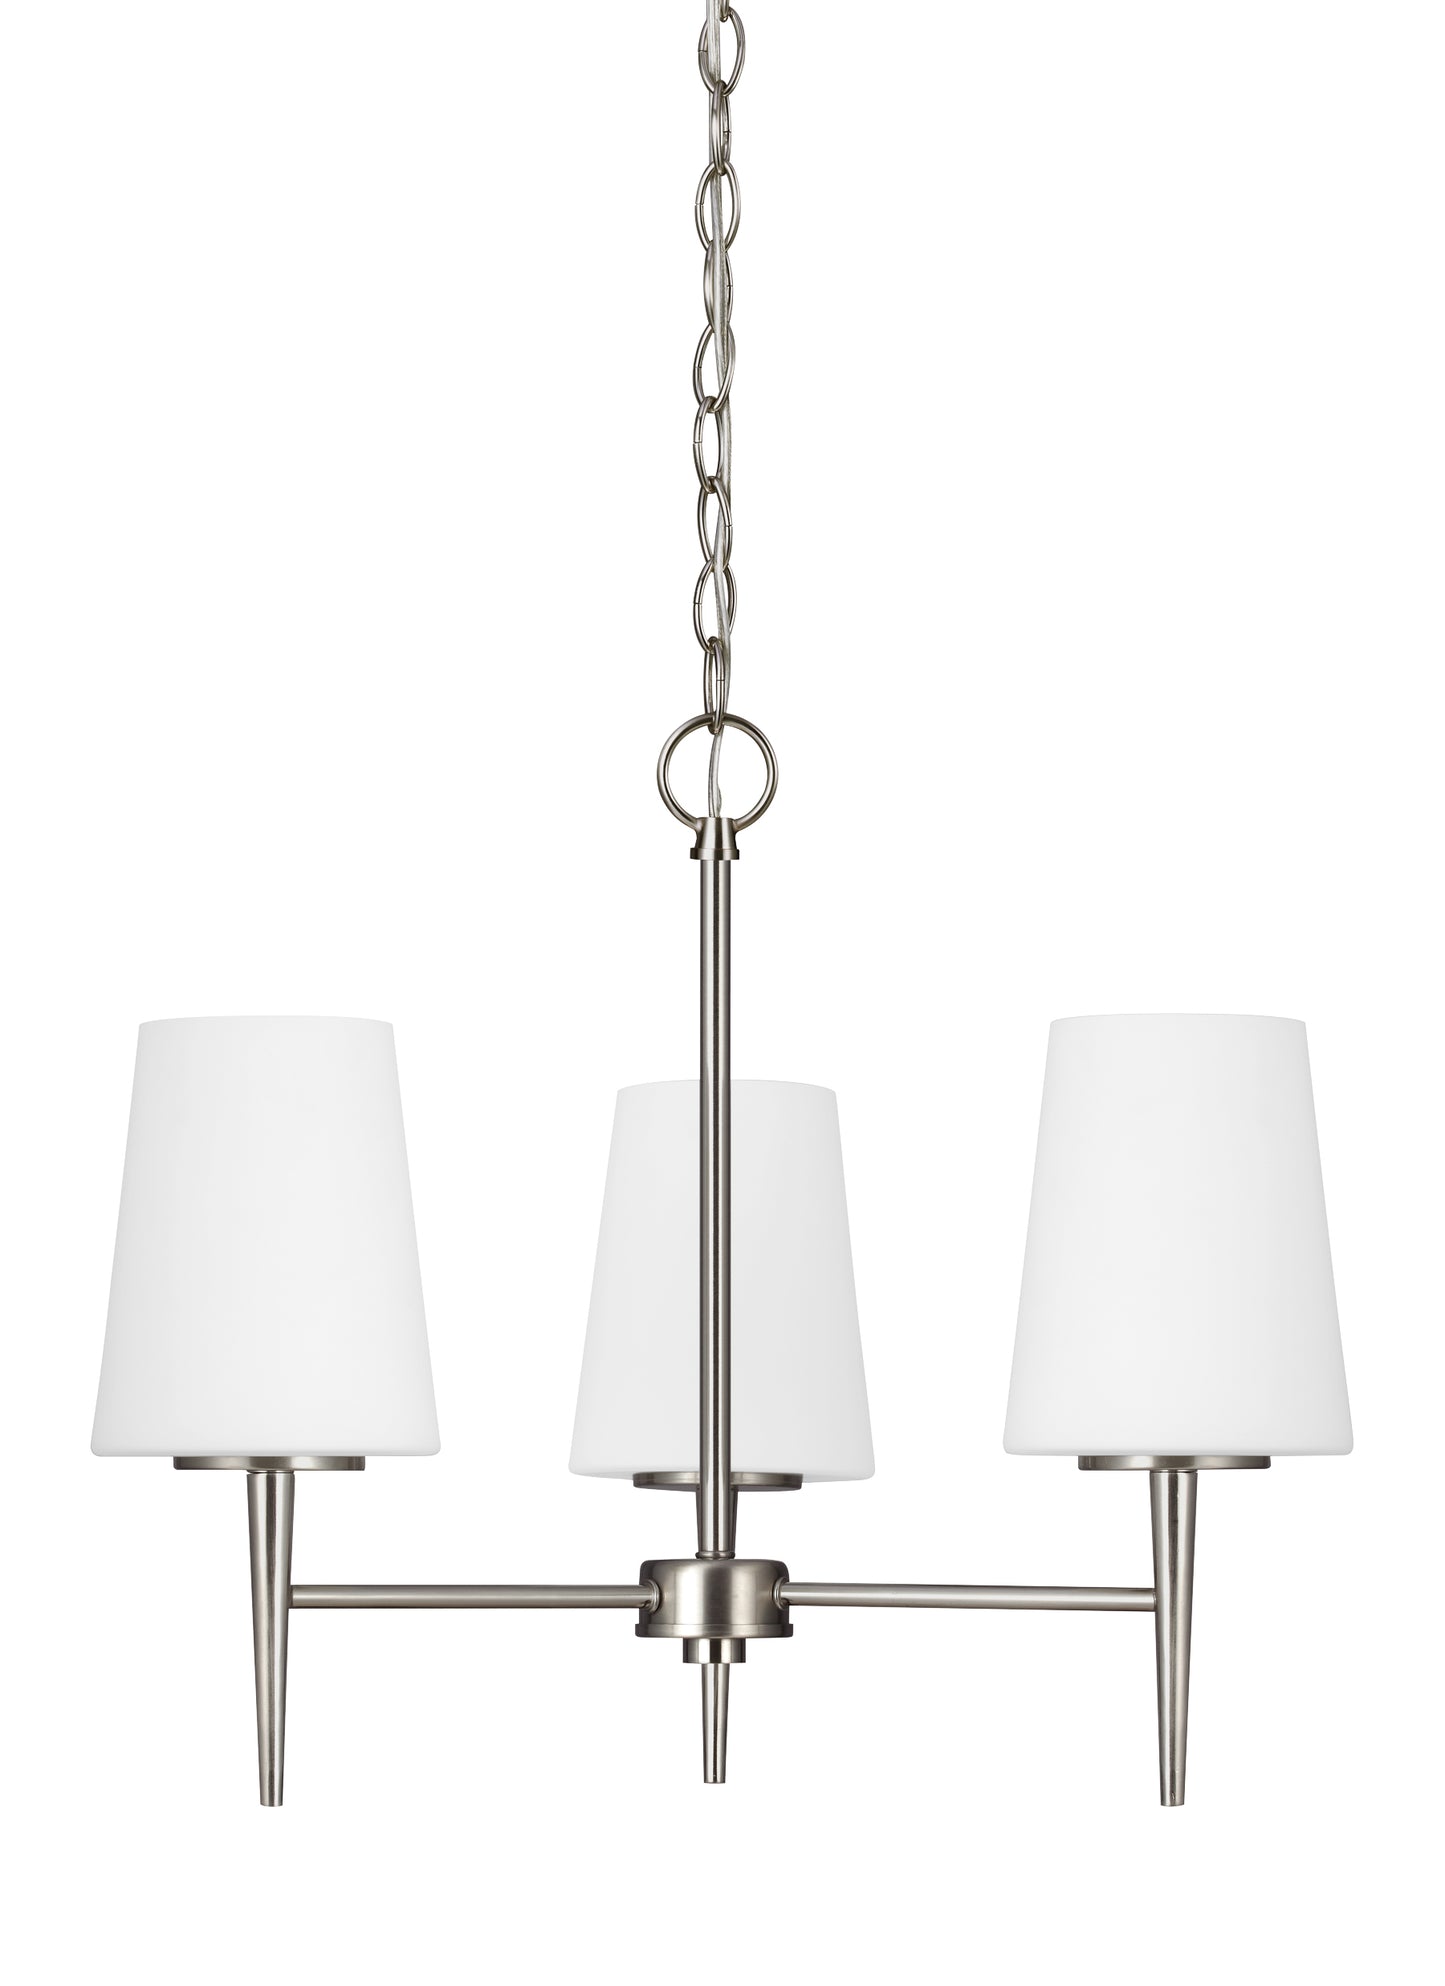 Driscoll contemporary 3-light indoor dimmable ceiling chandelier pendant light in brushed nickel silver finish with cased ...